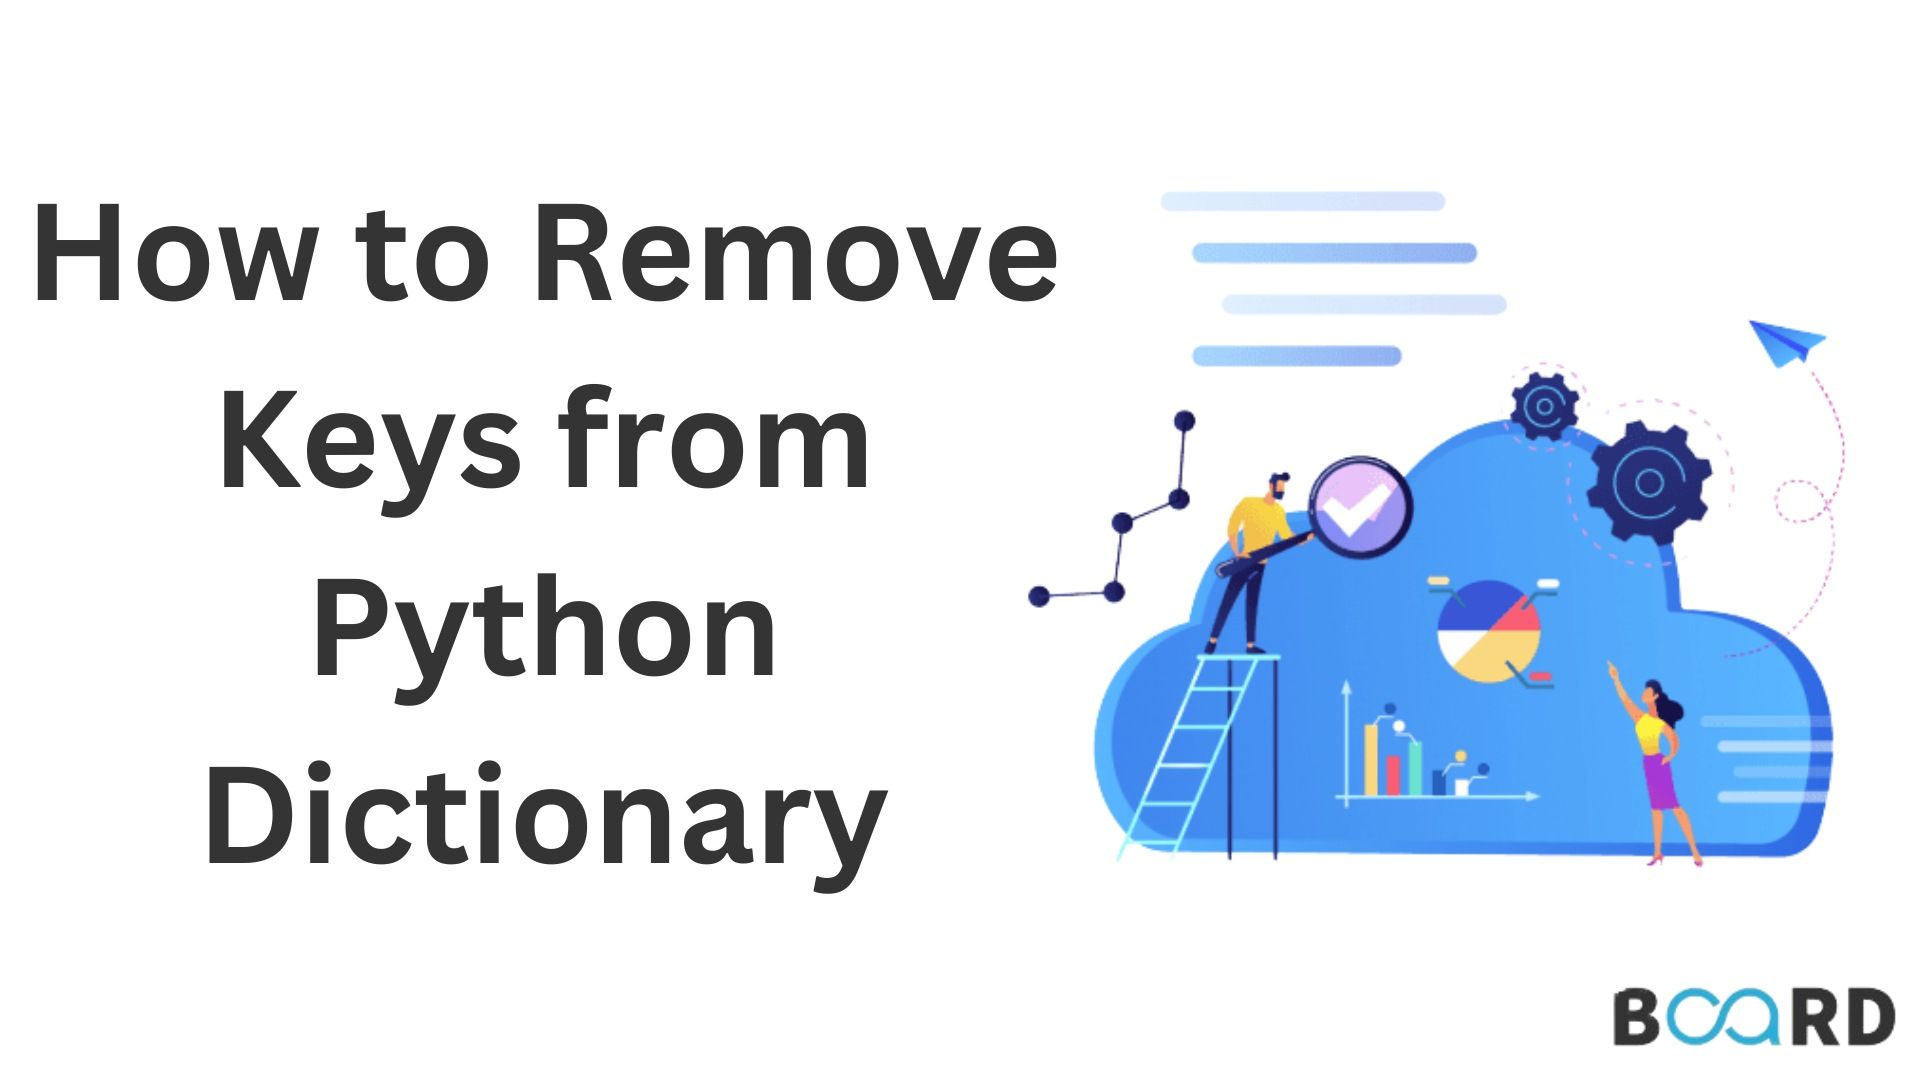 How to Remove Key from Python Dictionary?